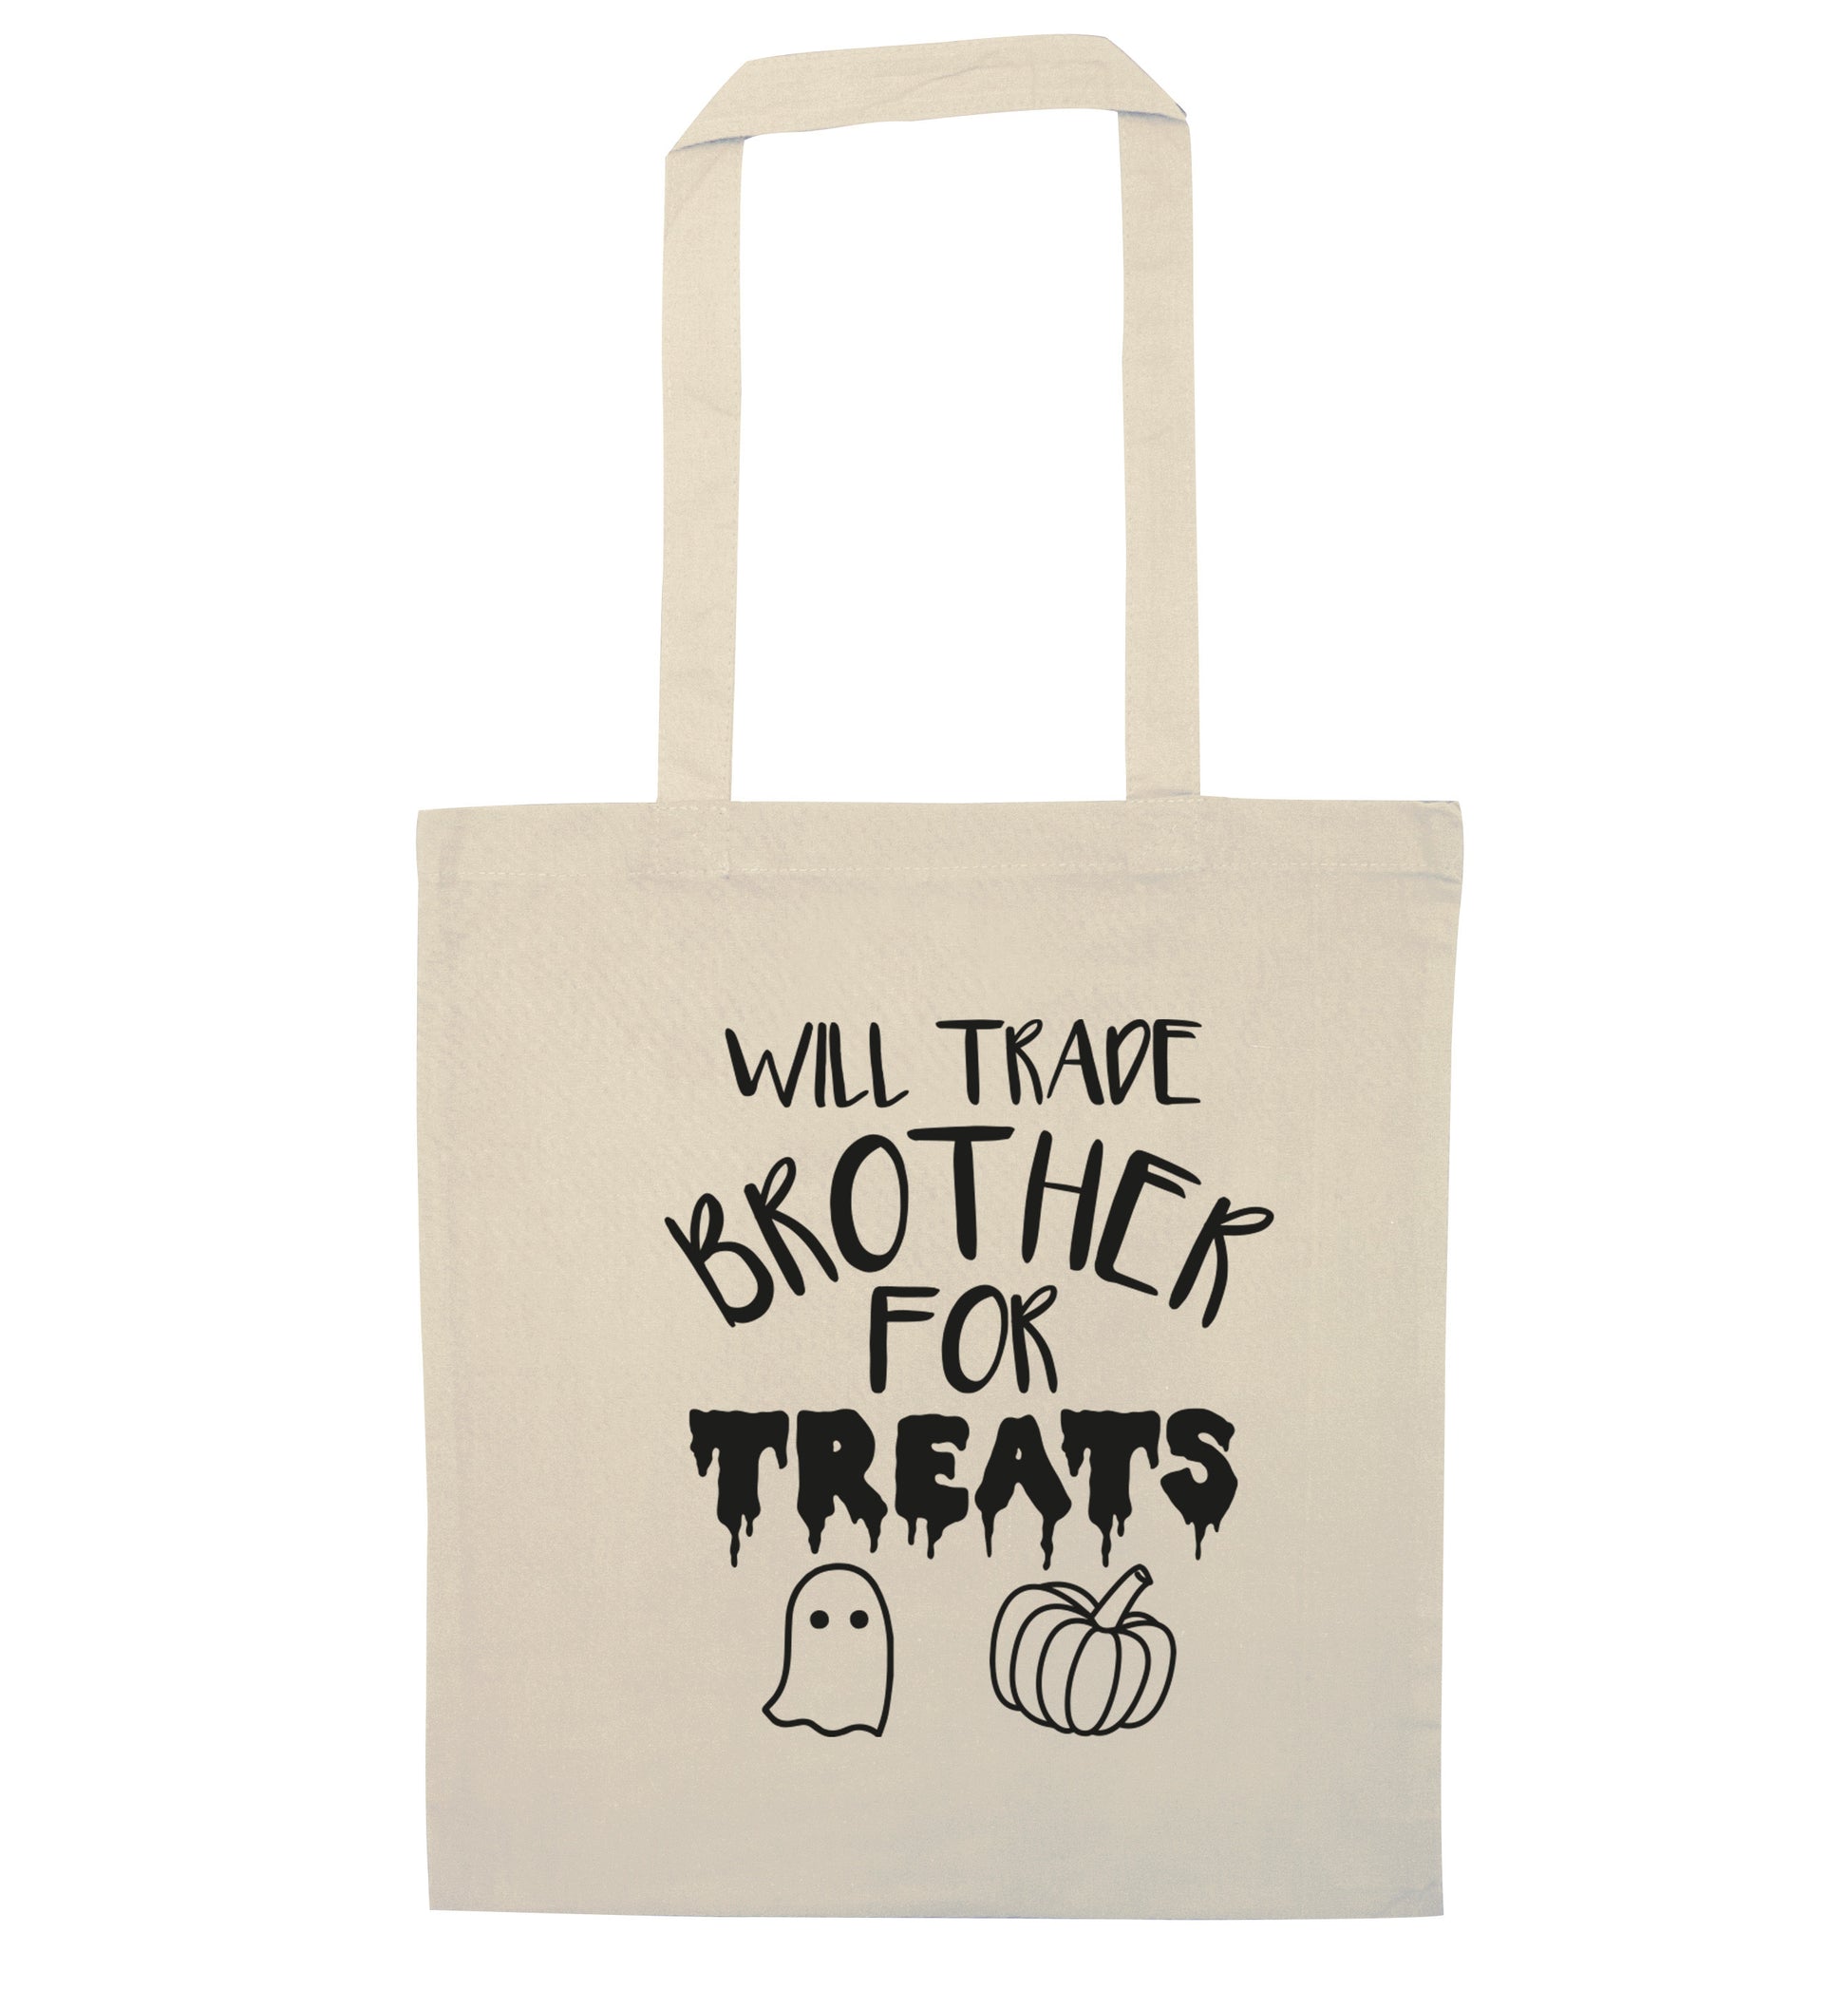 Will trade brother for treats natural tote bag